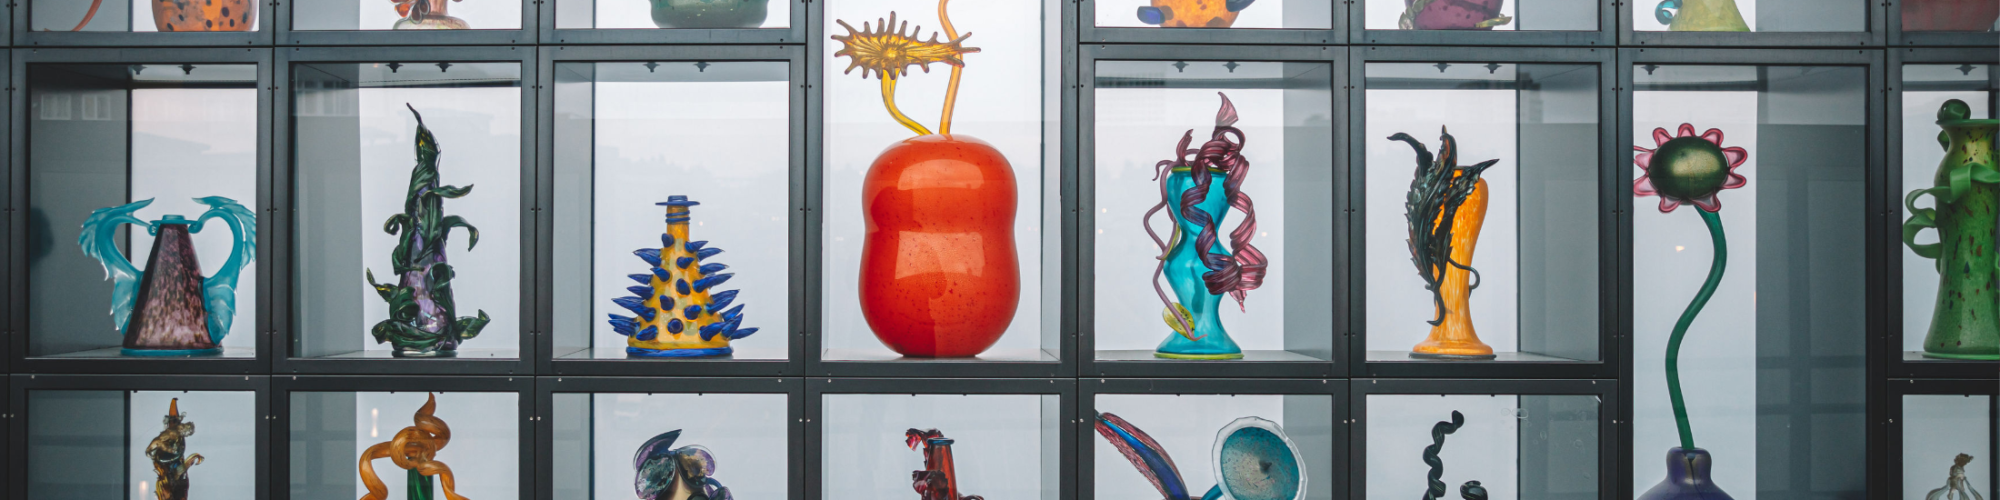 The image shows an array of artistic, colorful glass sculptures displayed in a glass cabinet, each with unique and intricate designs.